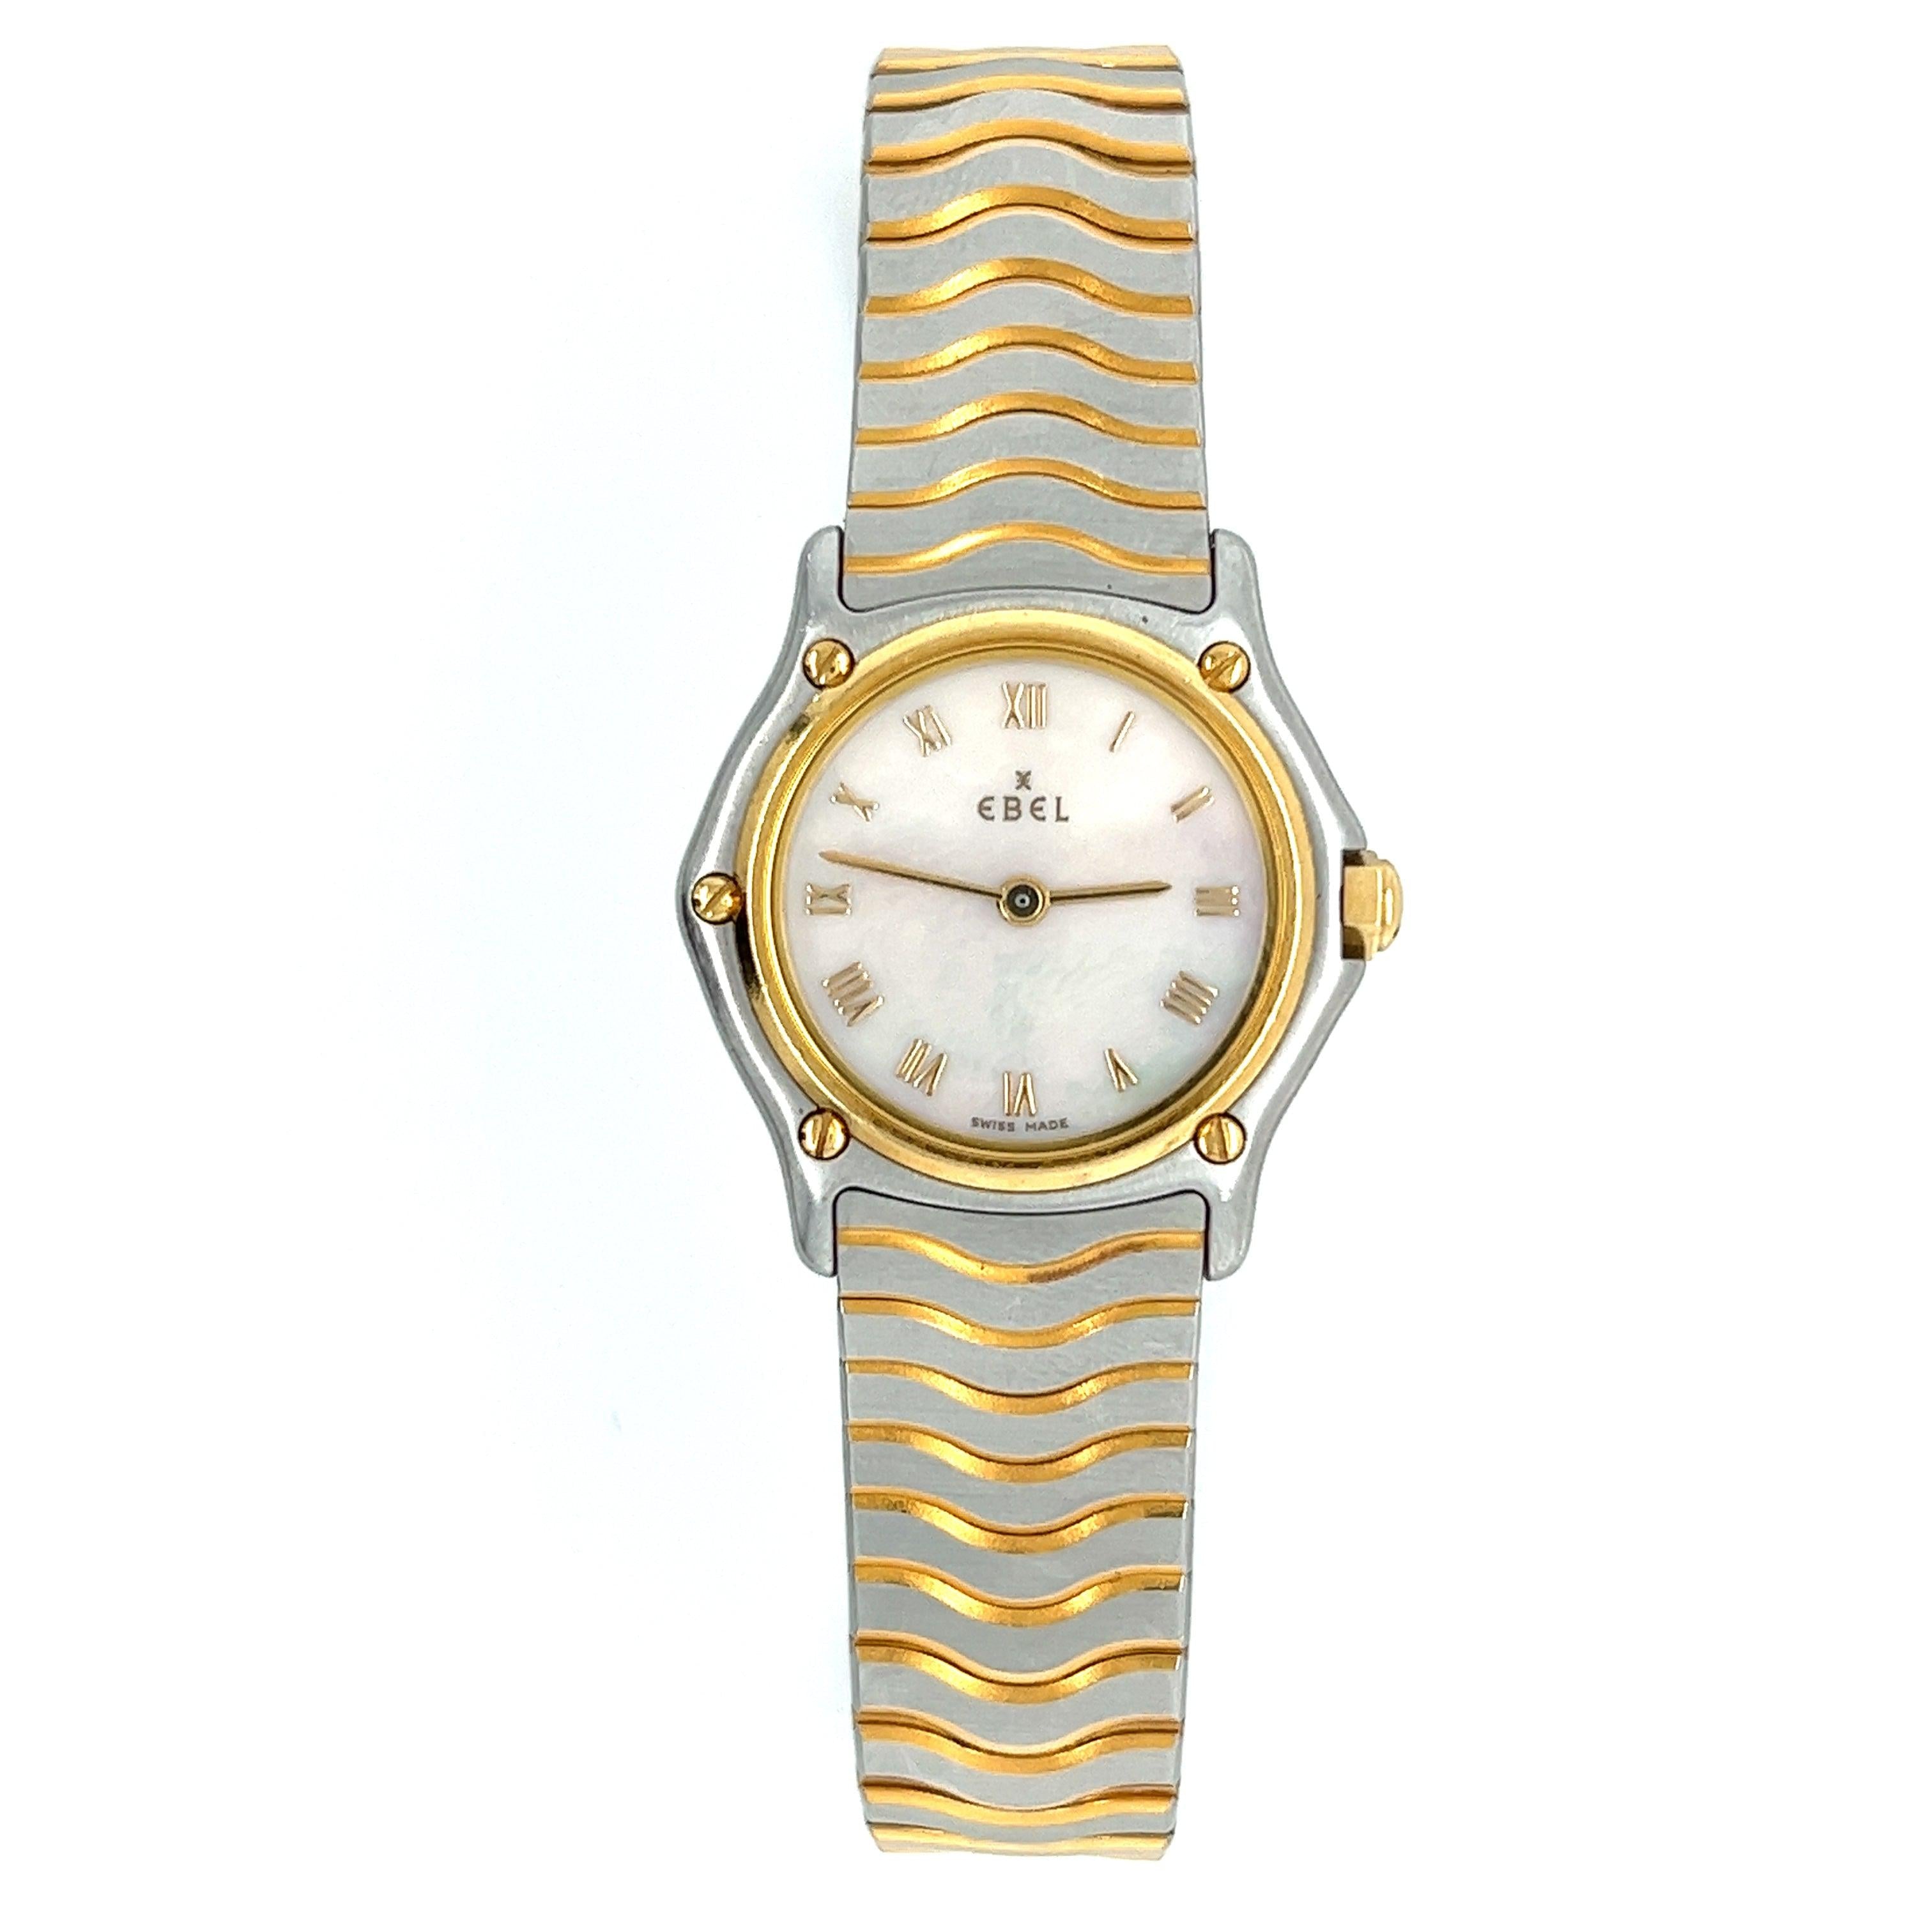 Ebel 1057901 Sport Classique Stainless Steel & 18K Gold Bezel Ladies Watch with Mother of Pearl Dial-Watch-ASSAY